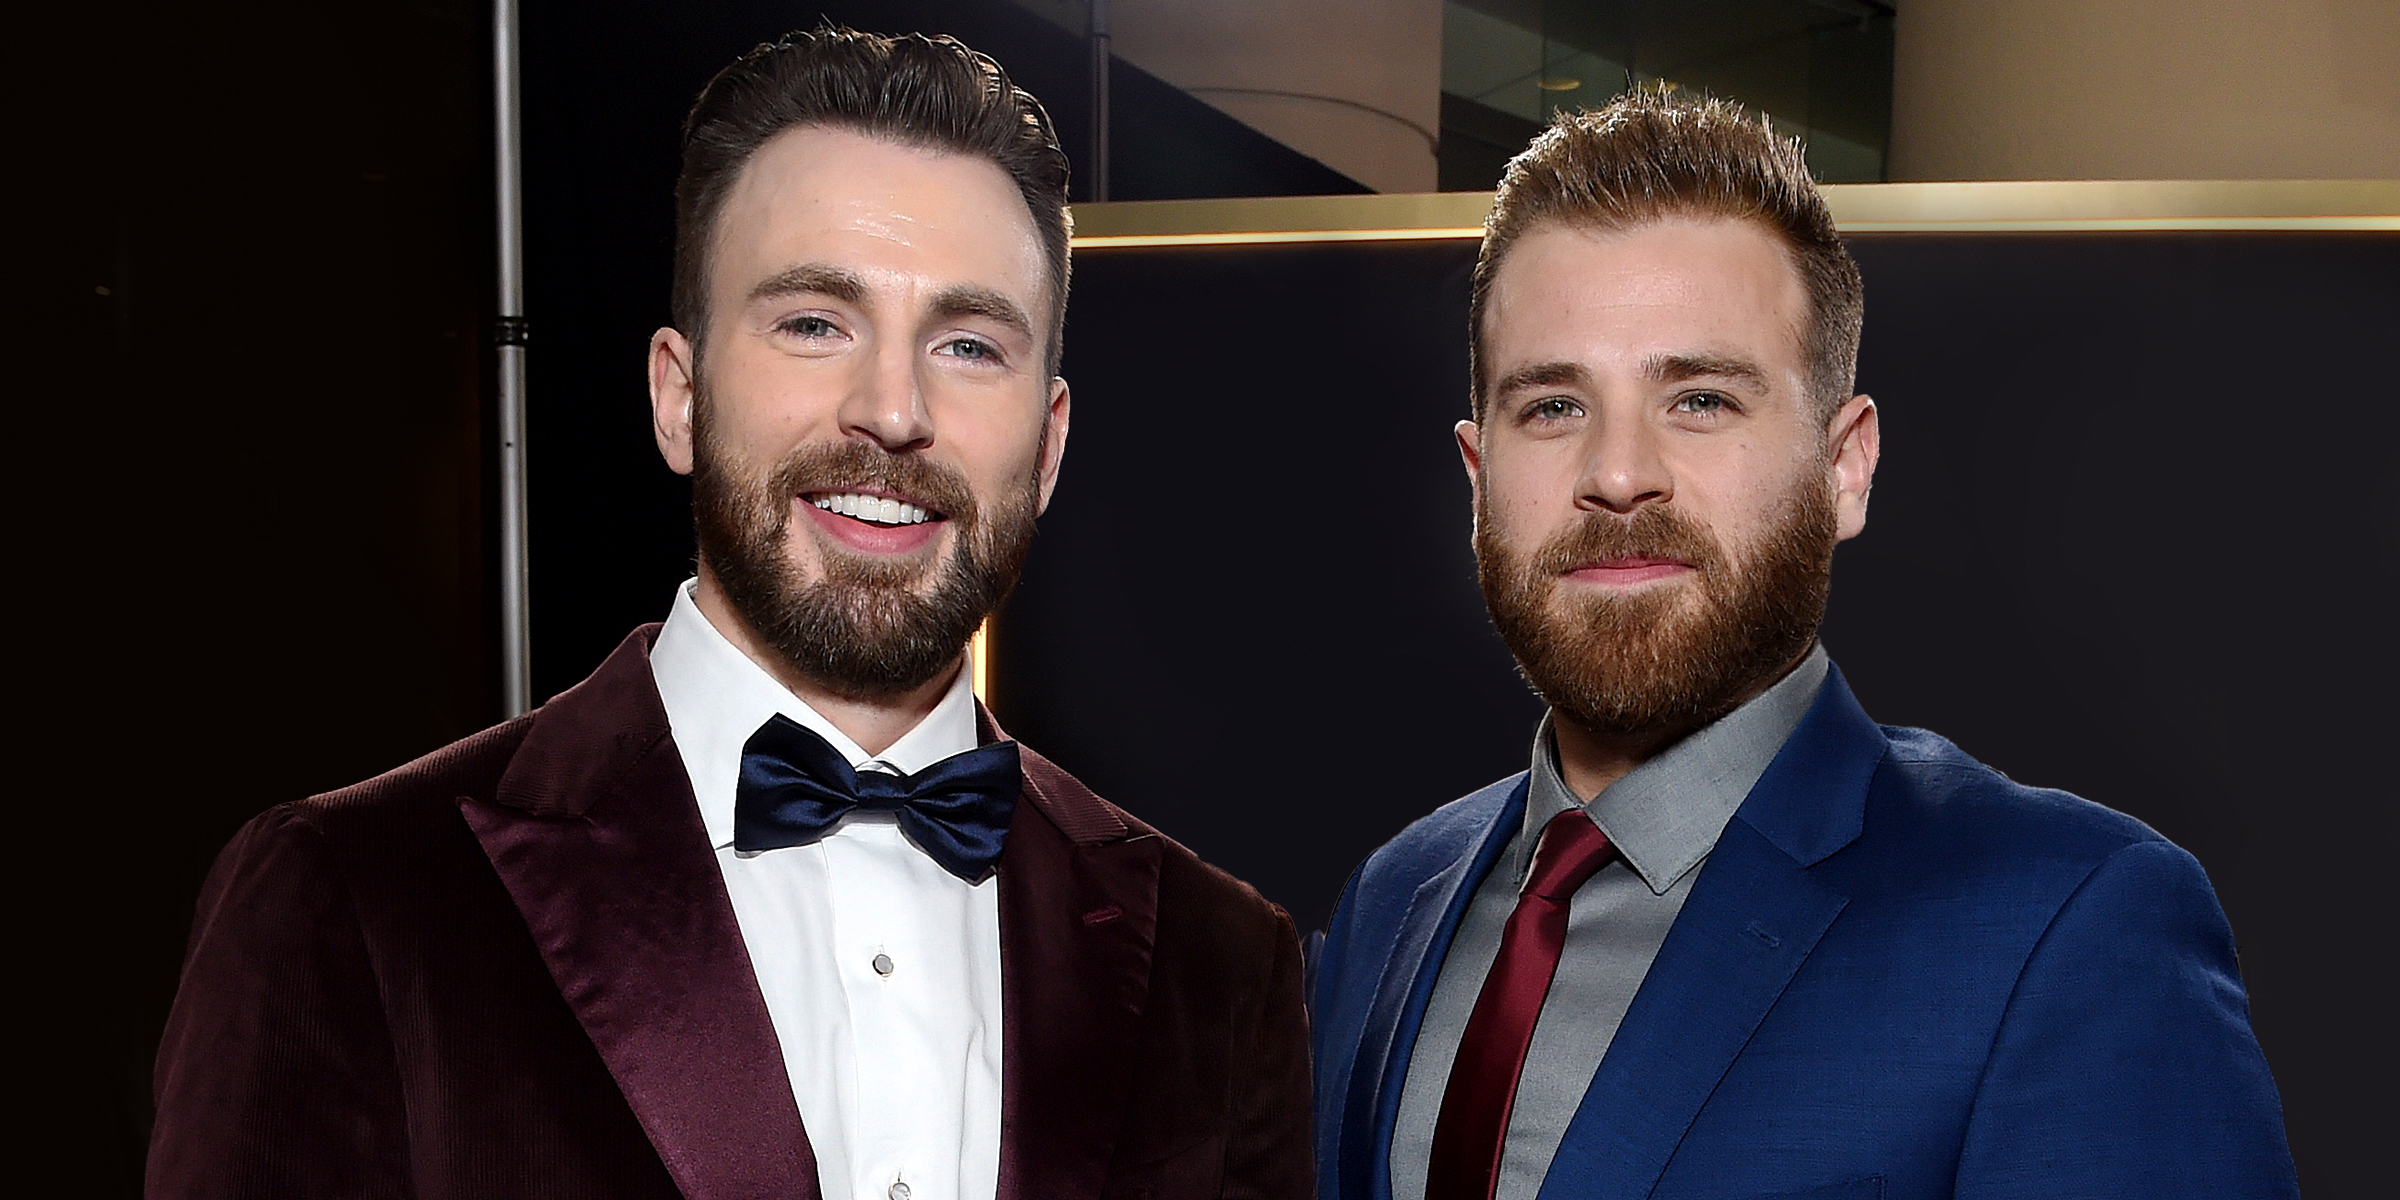 Chris and Scott and Evans | Source: Getty Images